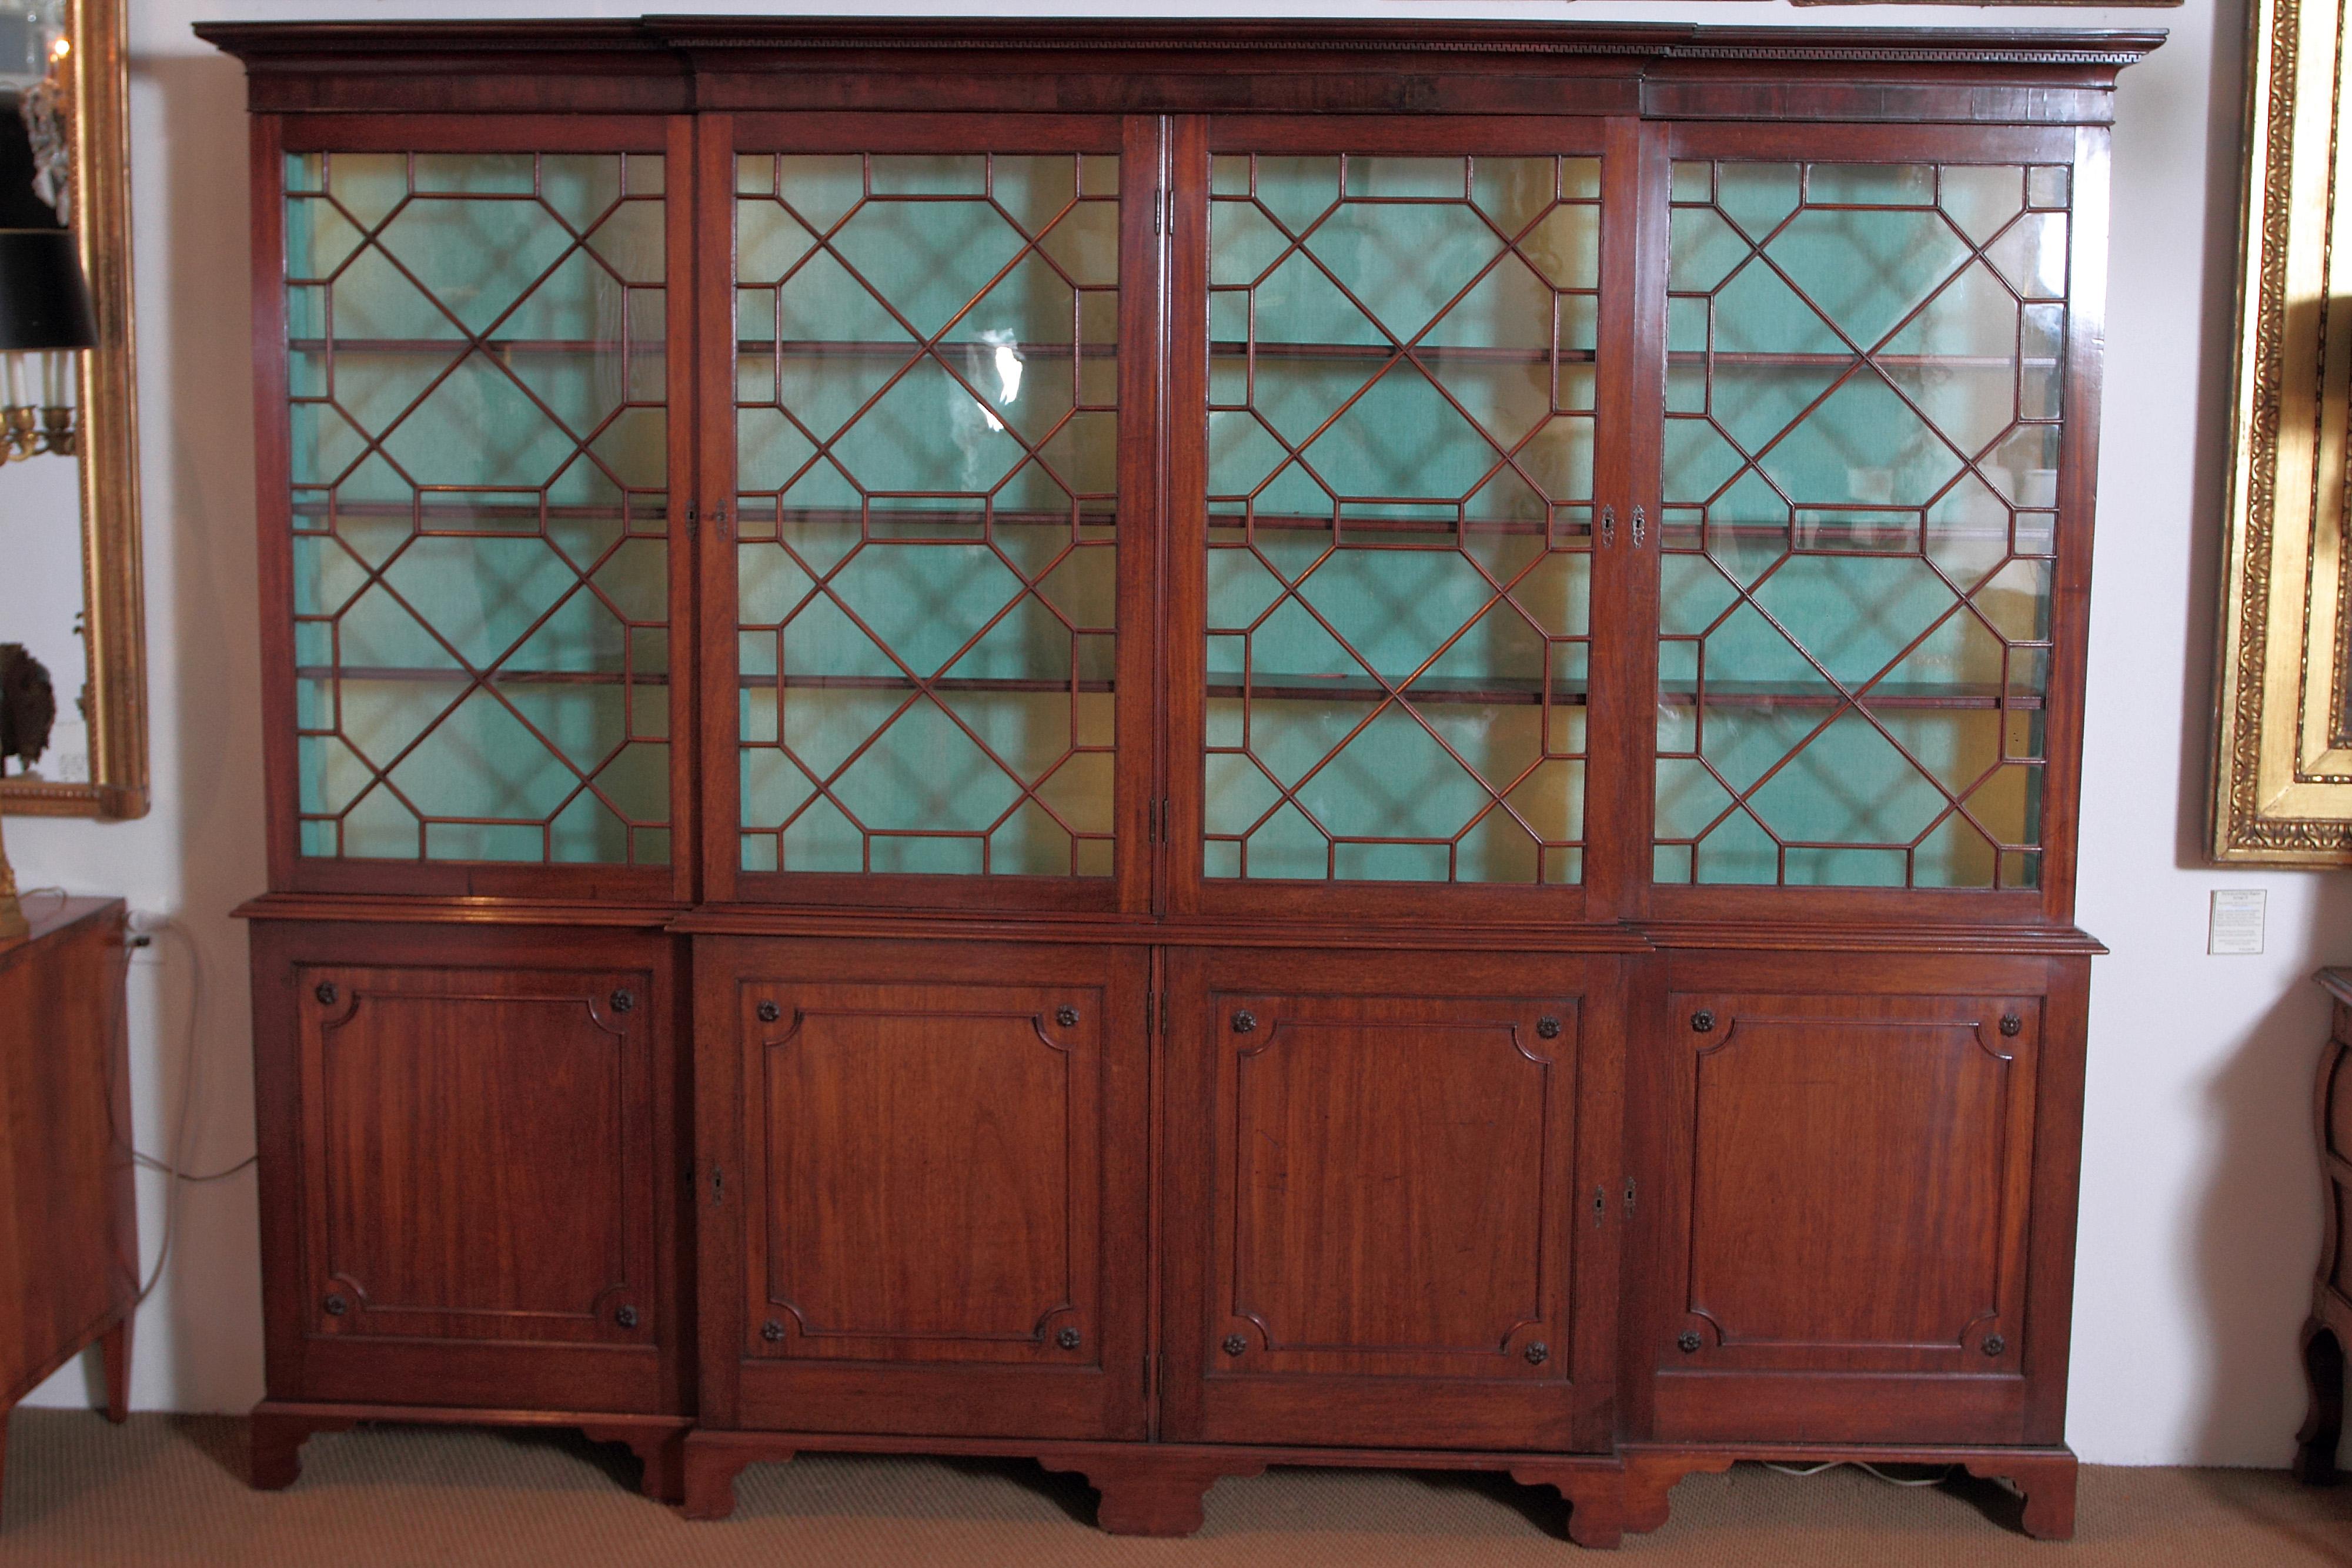 A large Georgian mahogany breakfront bookcase with carved Greek Key trimmed cornice above four mullioned glass doors. The interior is lined with green fabric and has dimmable lighting. Each section has three fixed wooden shelves. Below are four